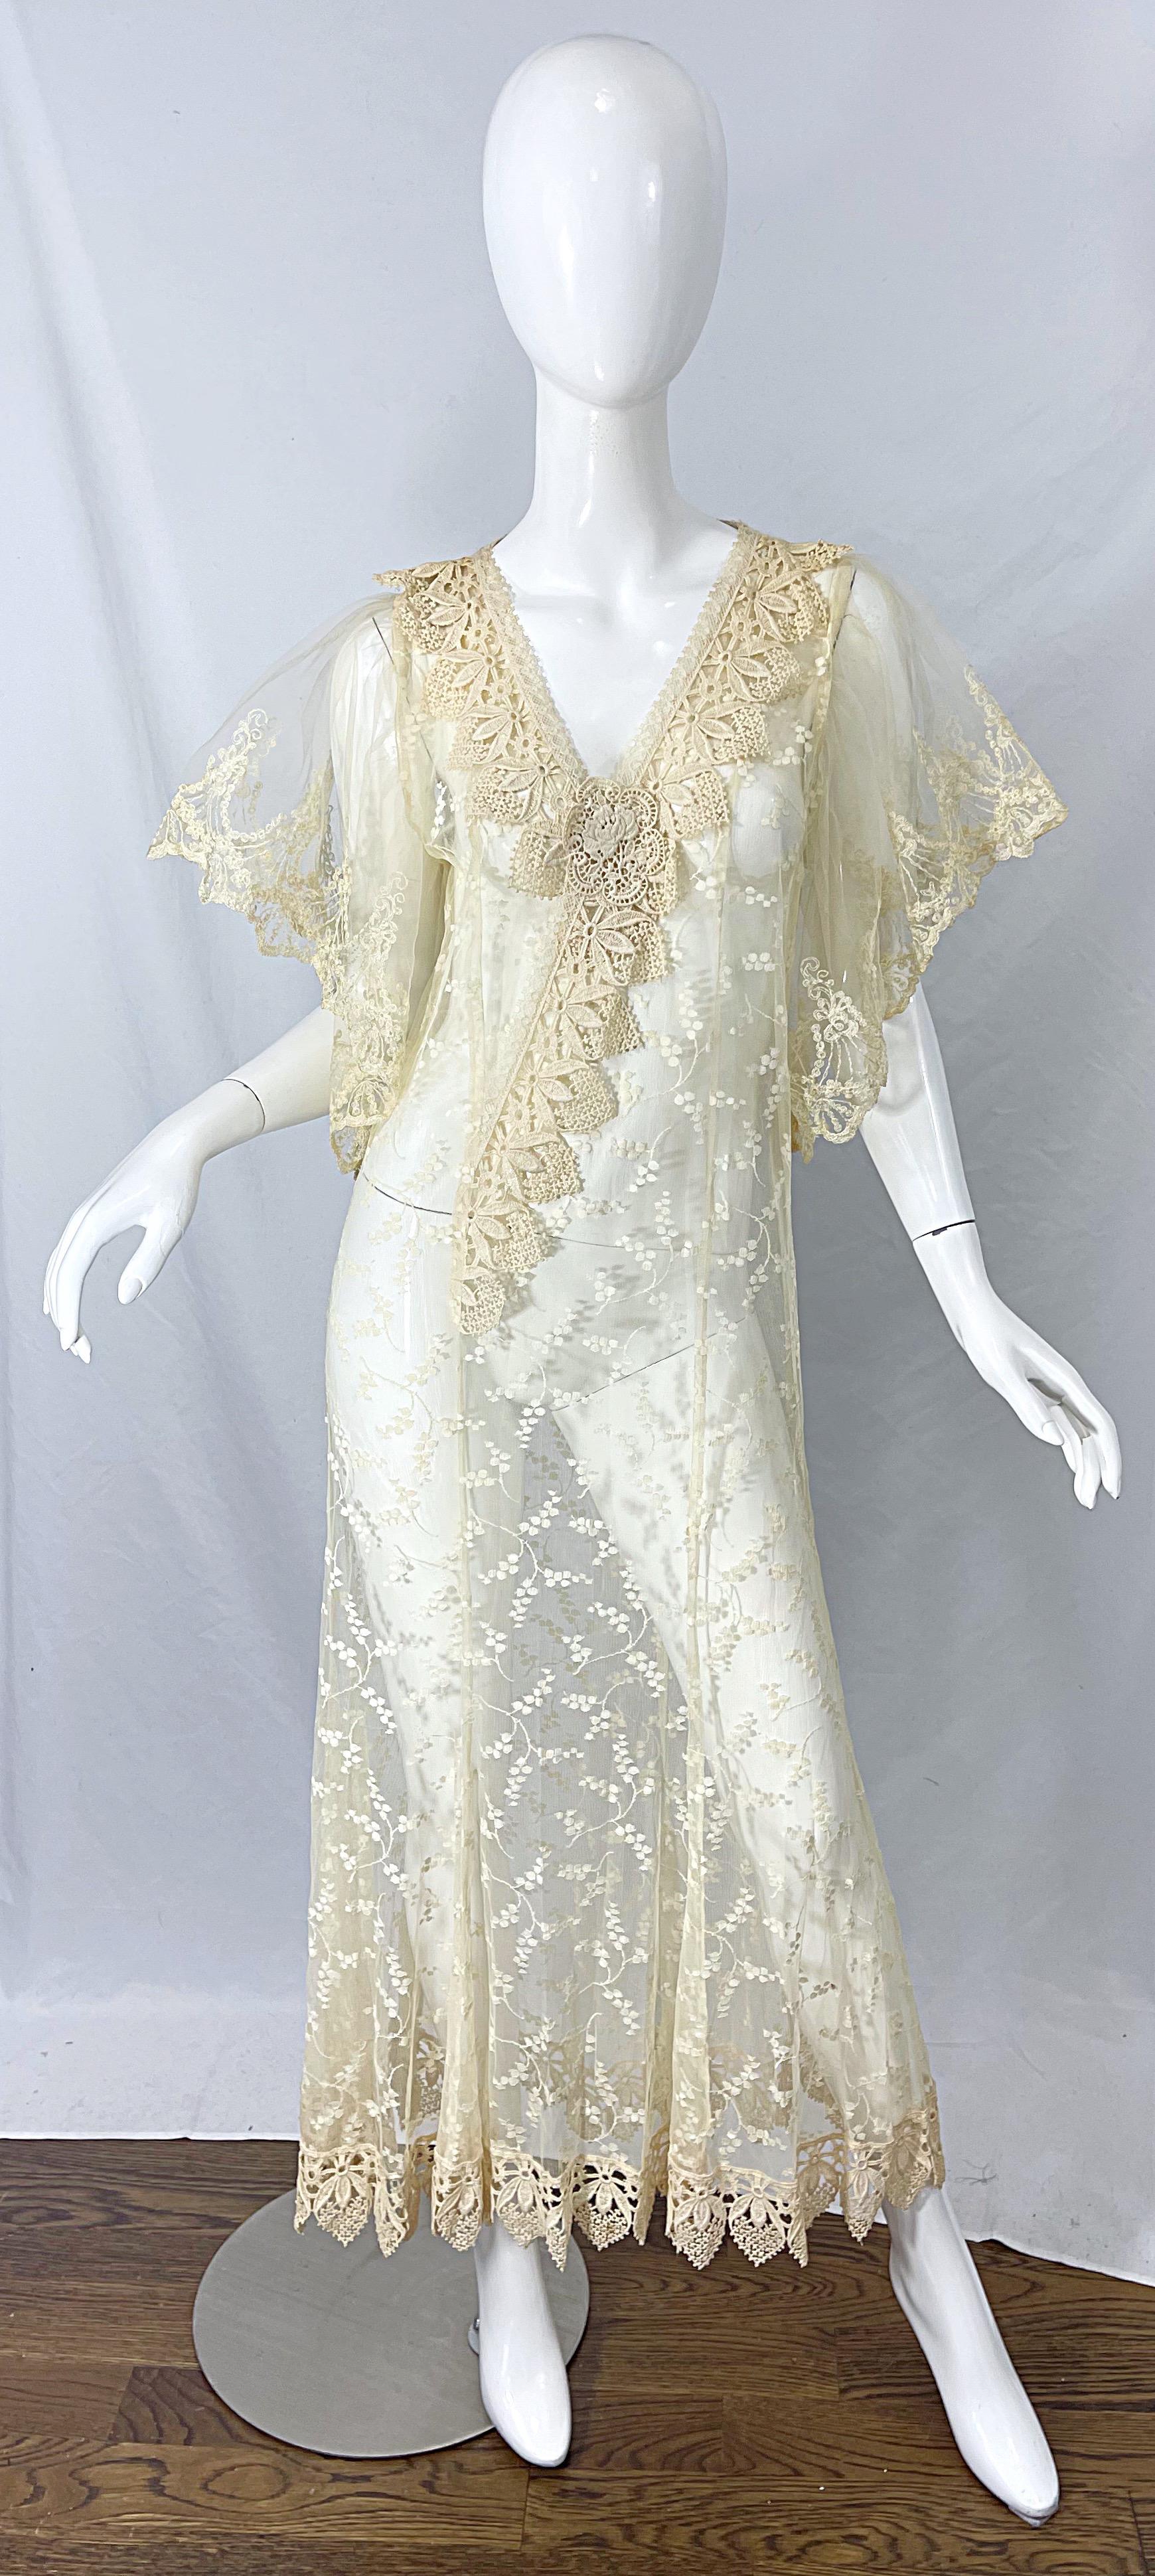 Avant Garde early 80s LORRIE KABALA ivory / off white sheer lace embroidered caftan maxi dress ! Features romantic vintage lace with embroidered lace trims. Buttons up the top back center neck. Super versatile piece. Can be worn with a slip for a